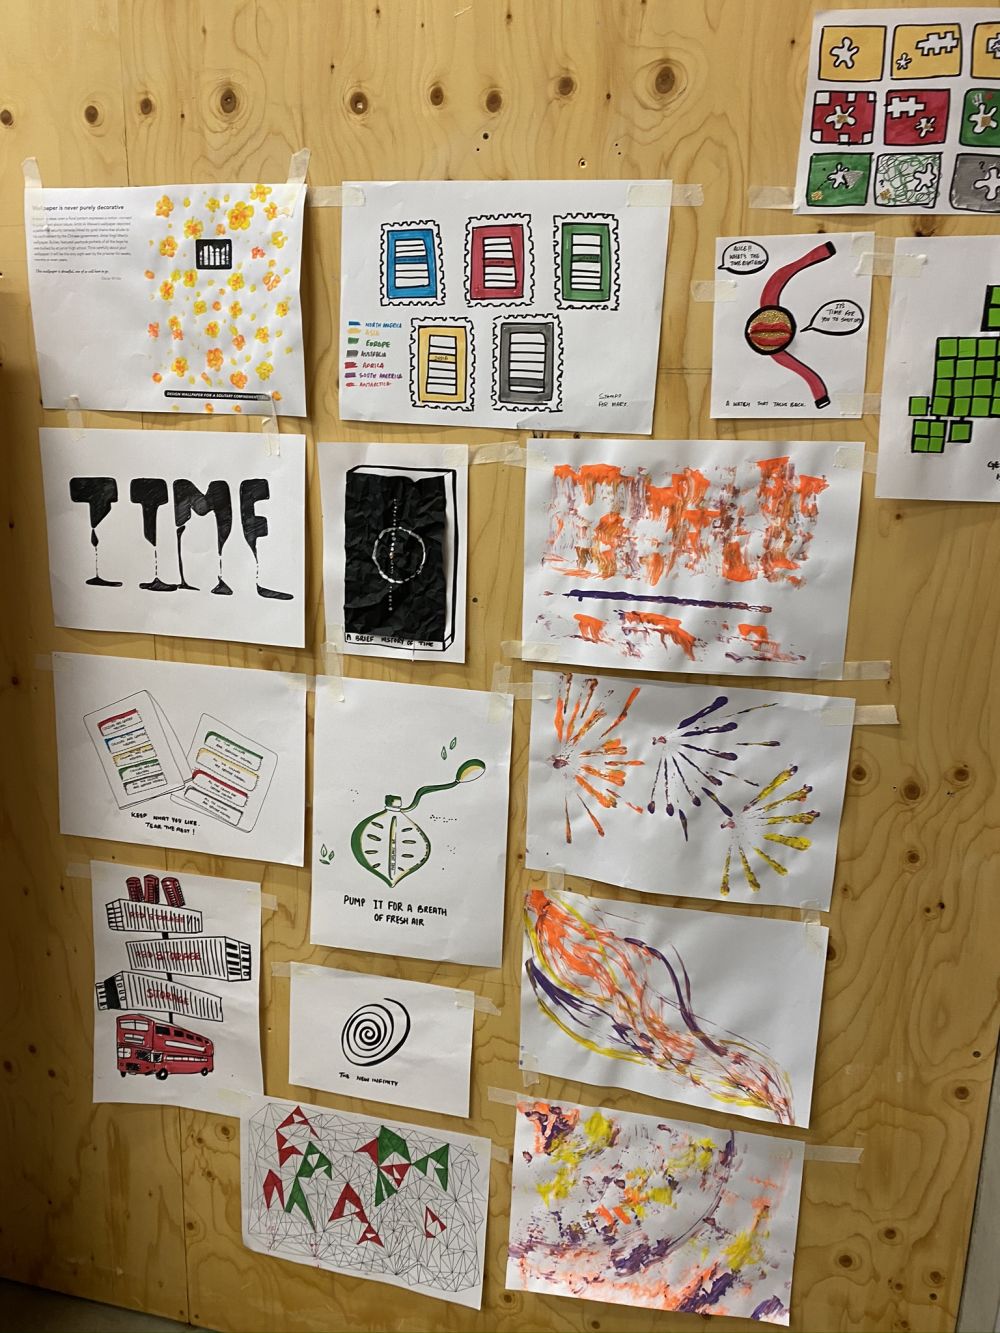 Different illustrations and drawings done on paper stuck up on the wall